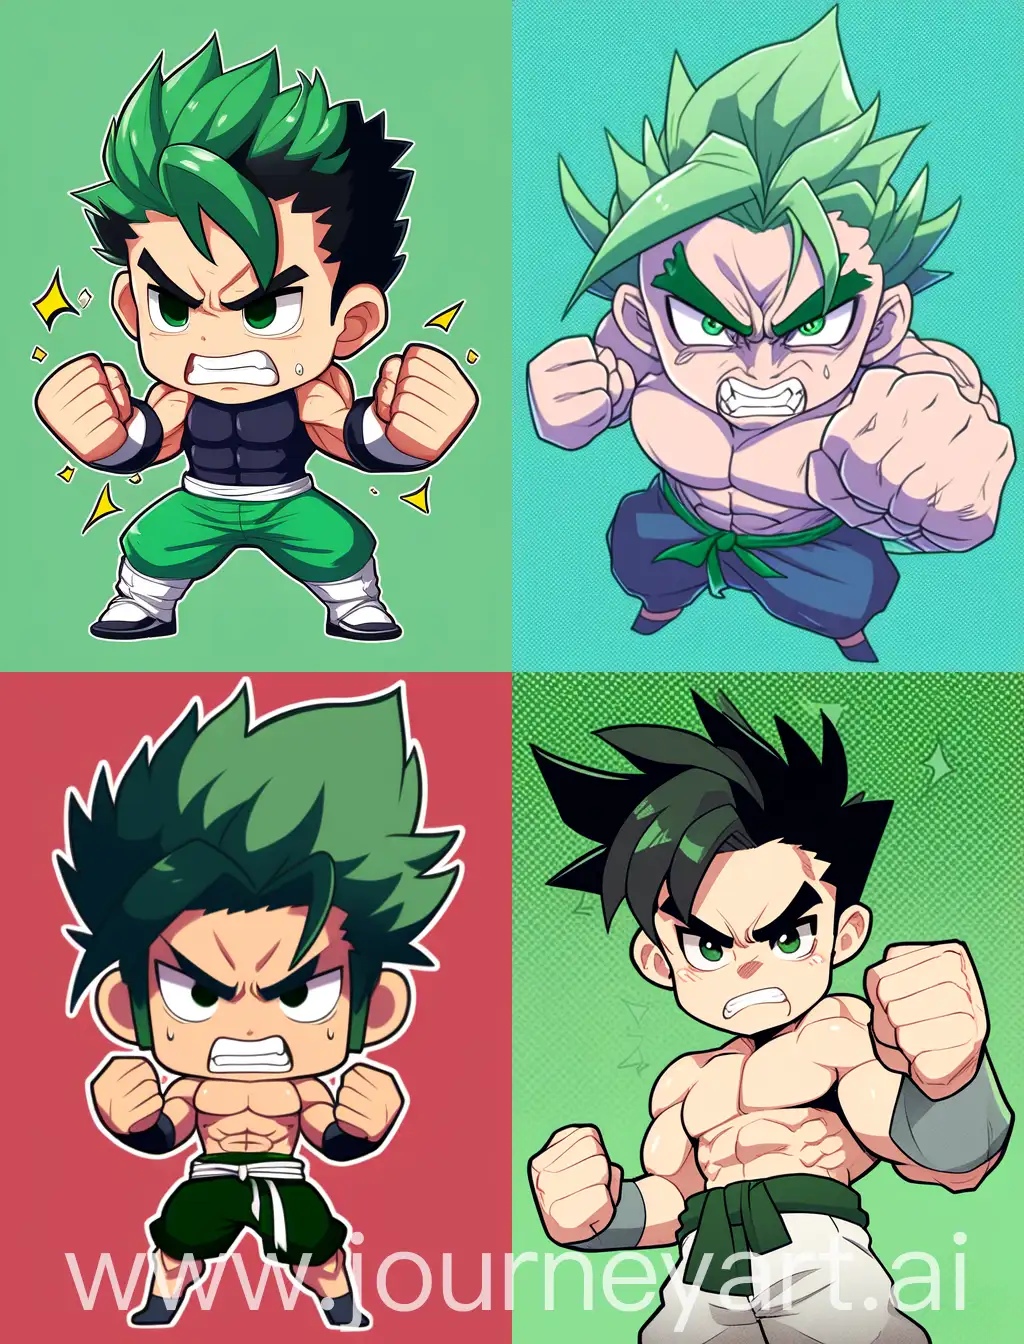 Chibi-Anime-Character-Flexing-Muscles-Against-Green-Background